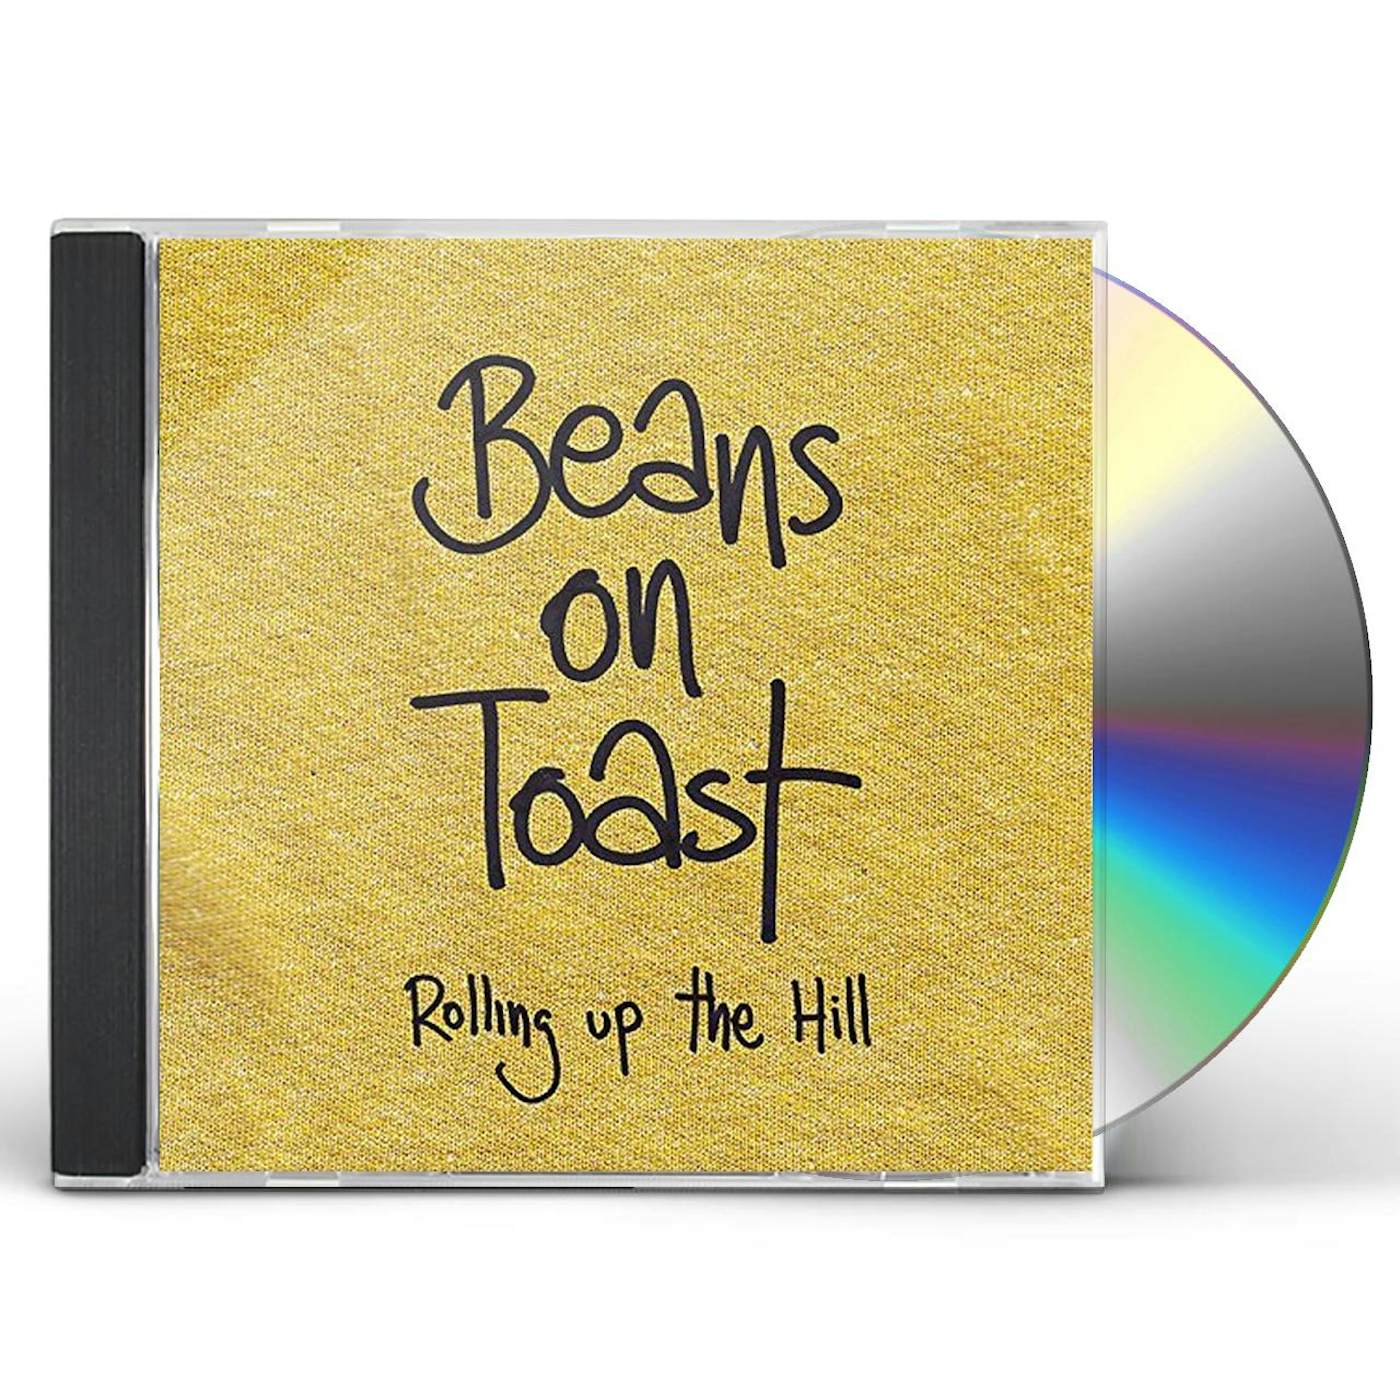 Beans on Toast ROLLING UP THE HILL (EXP) CD